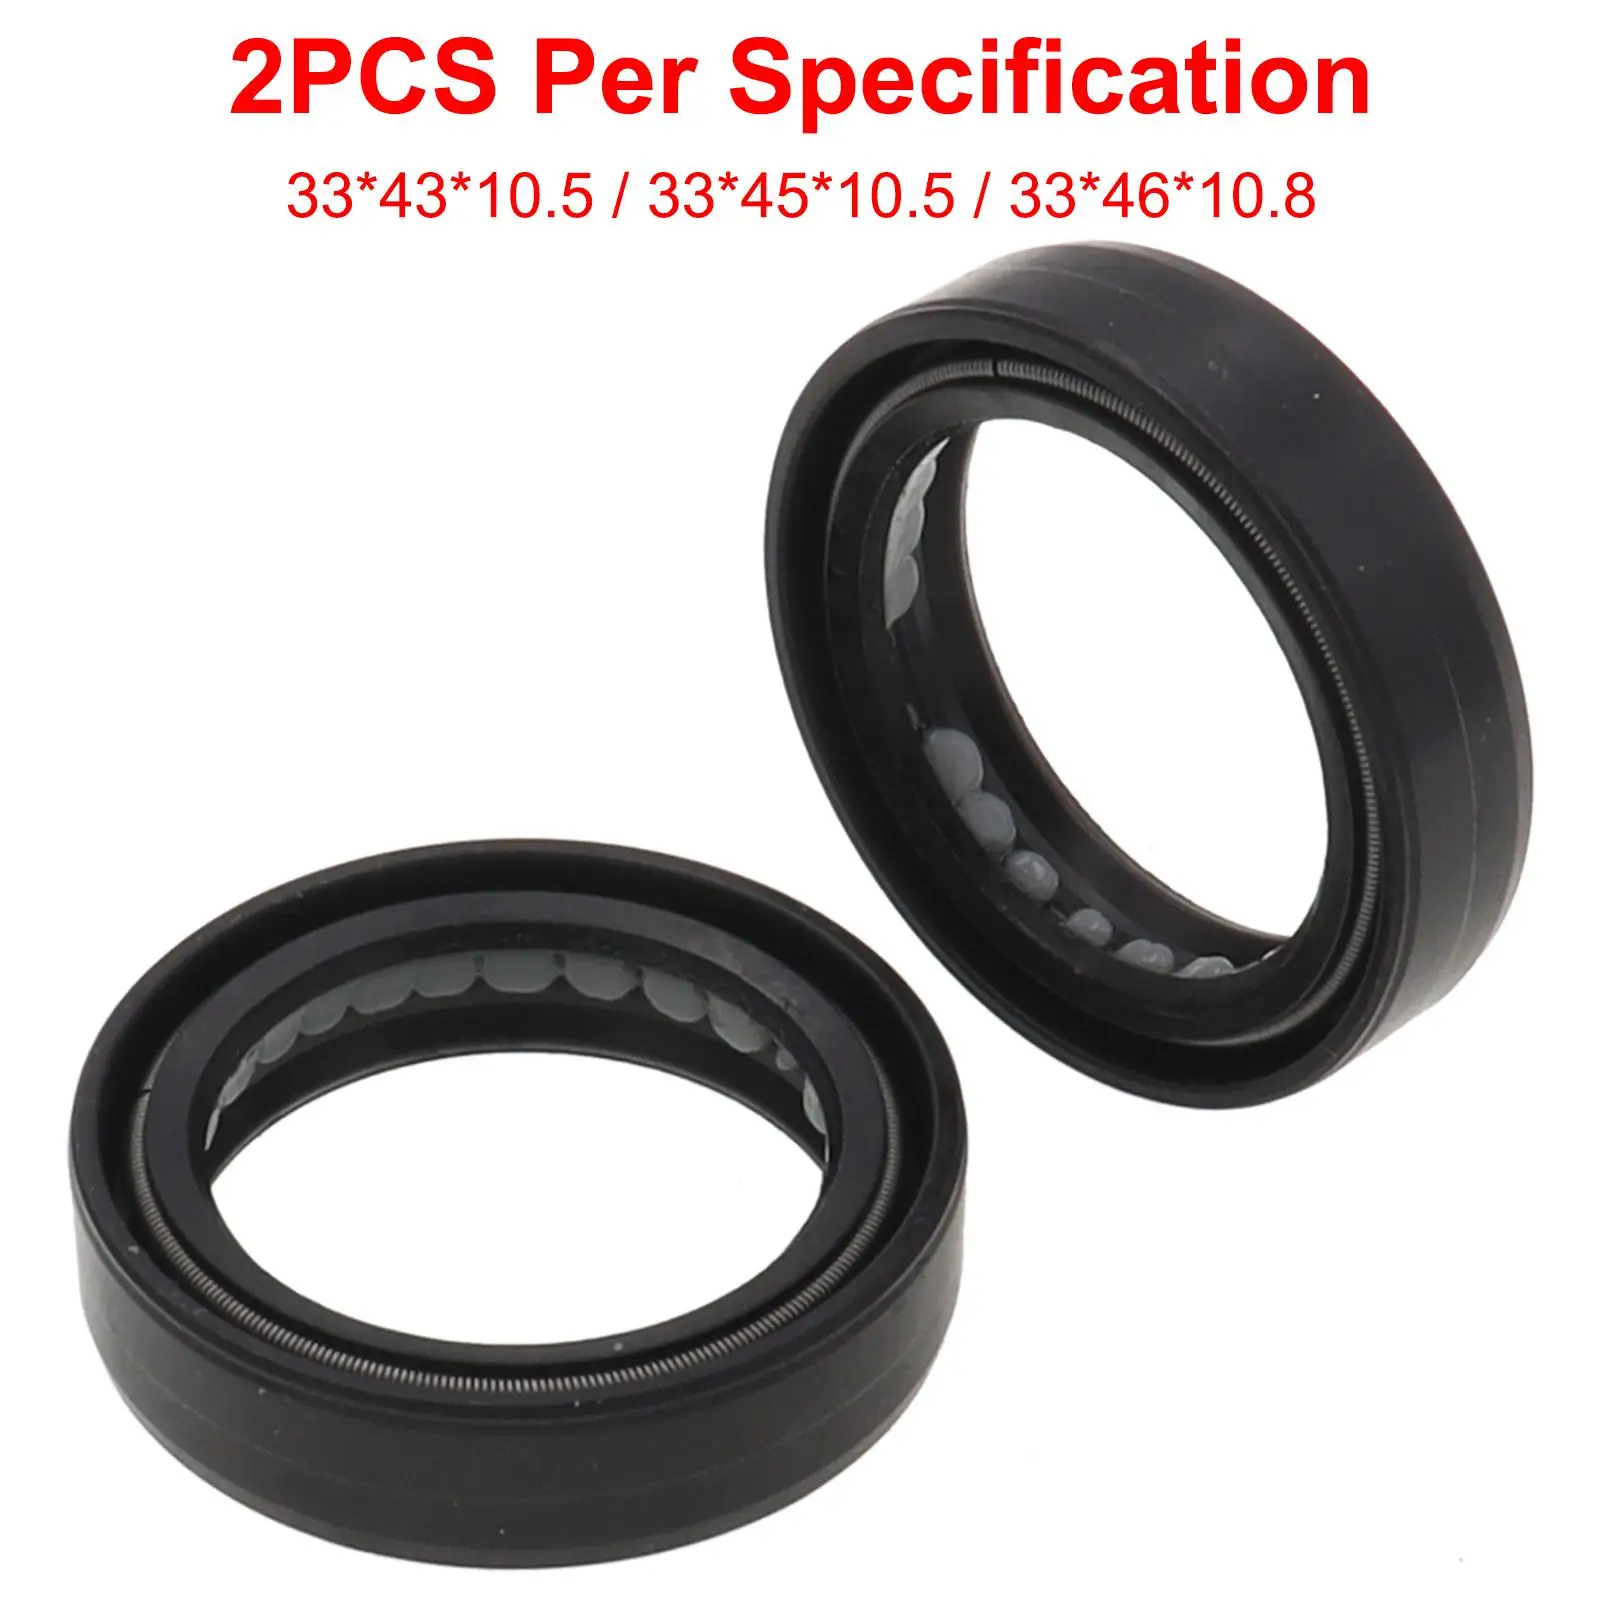 Professional Motorcycle Front Fork Damper Oil Seal High Performance Durable